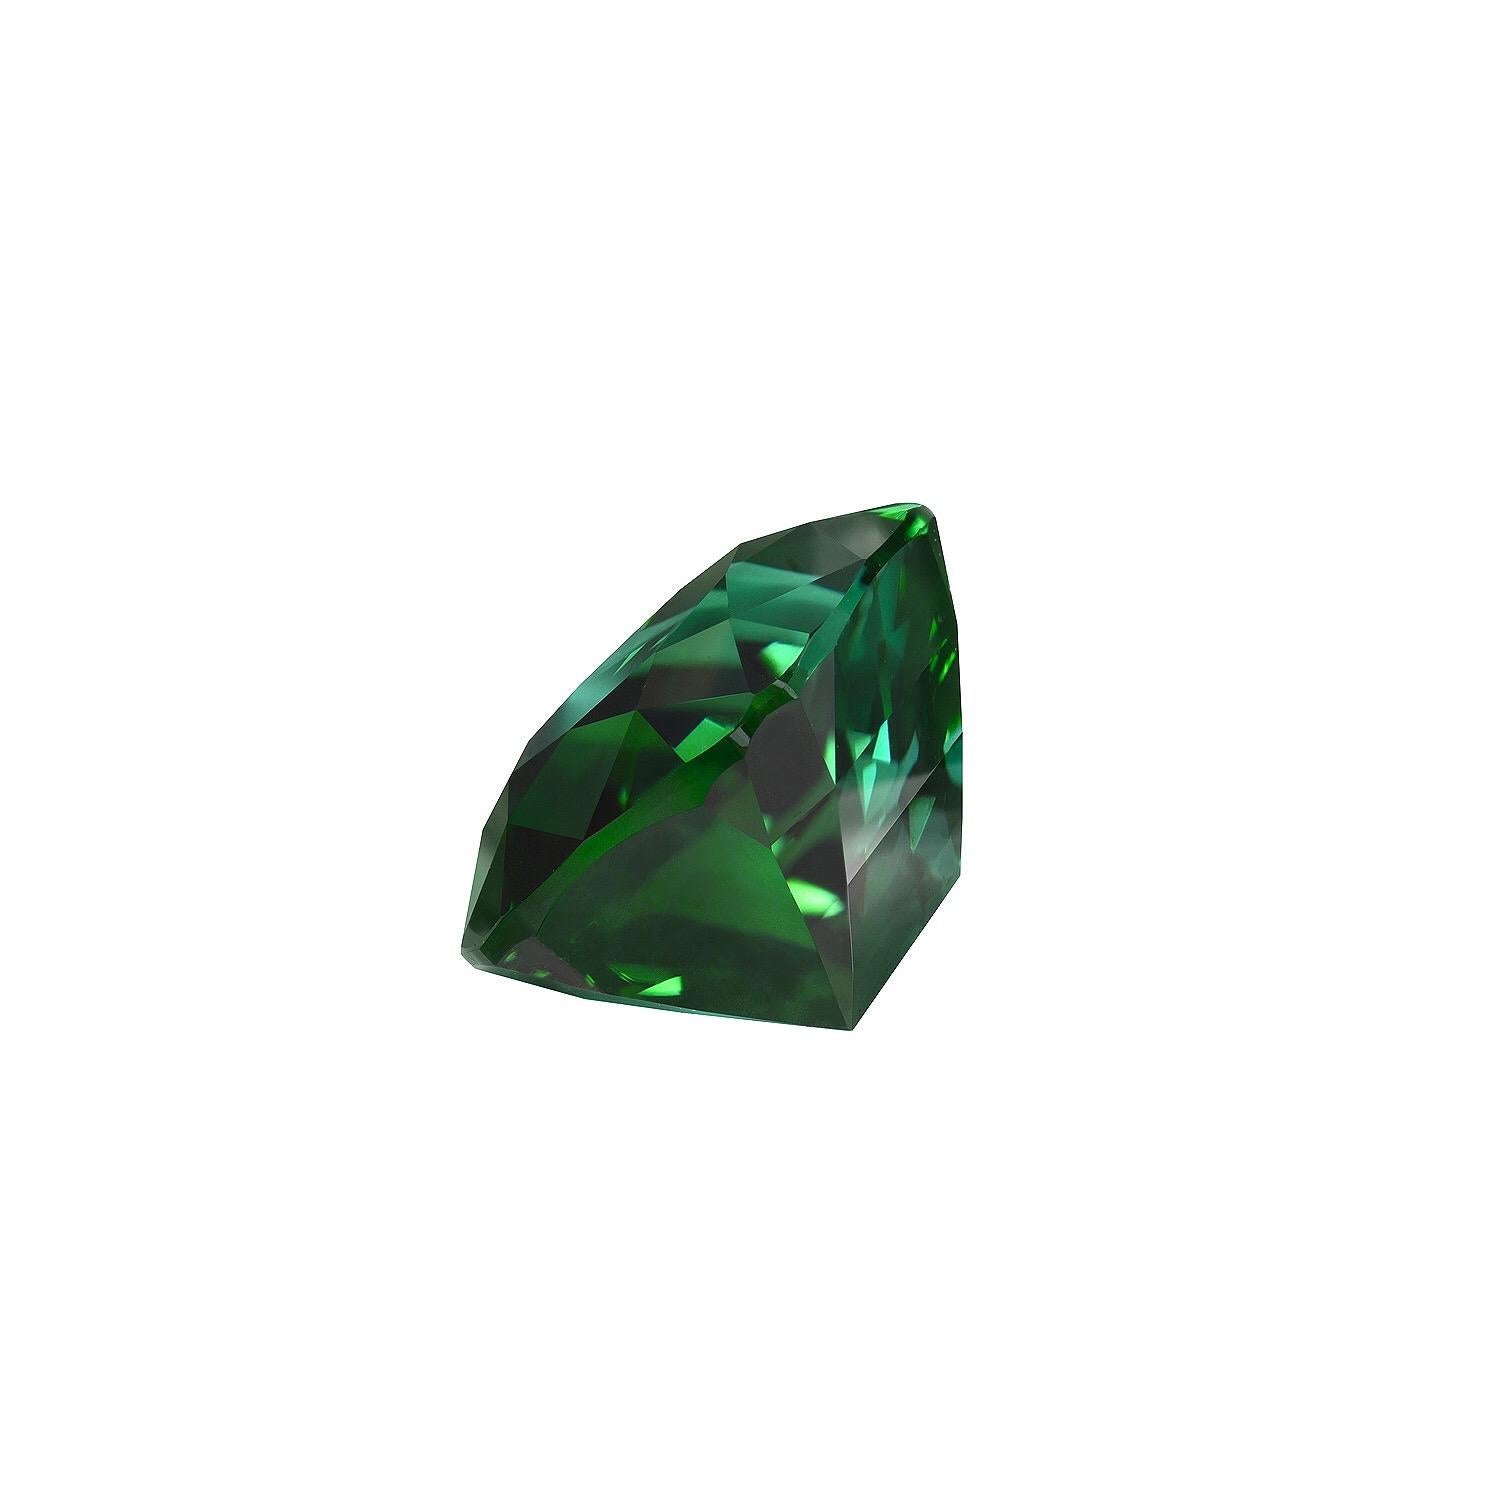 Marvelous 4.65 carat Bluish Green Tourmaline cushion gem, offered loose to someone special.
Returns are accepted and paid by us within 7 days of delivery.
We offer supreme custom jewelry work upon request. Please contact us for more details.
For